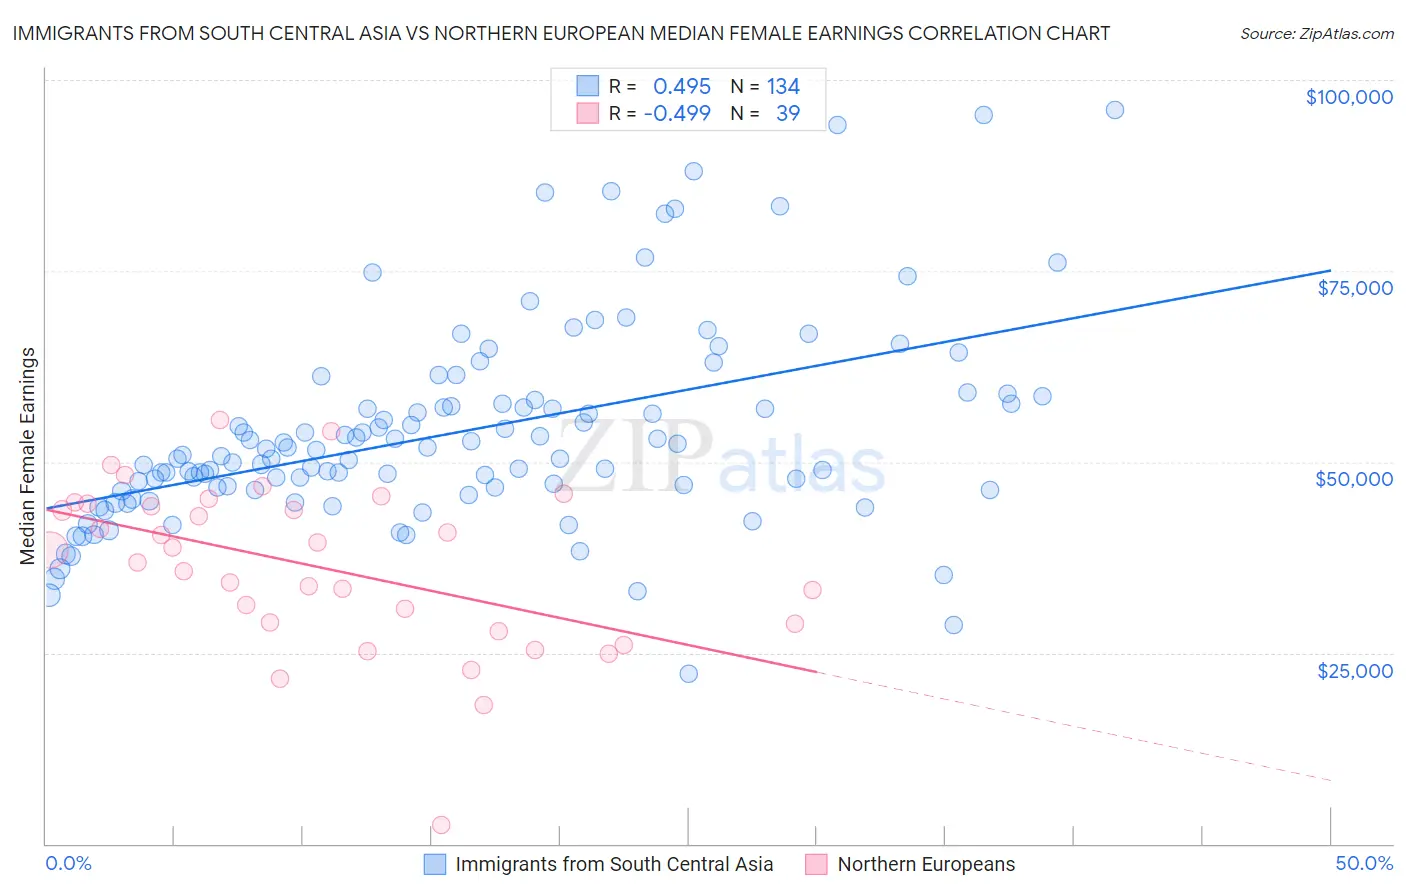 Immigrants from South Central Asia vs Northern European Median Female Earnings